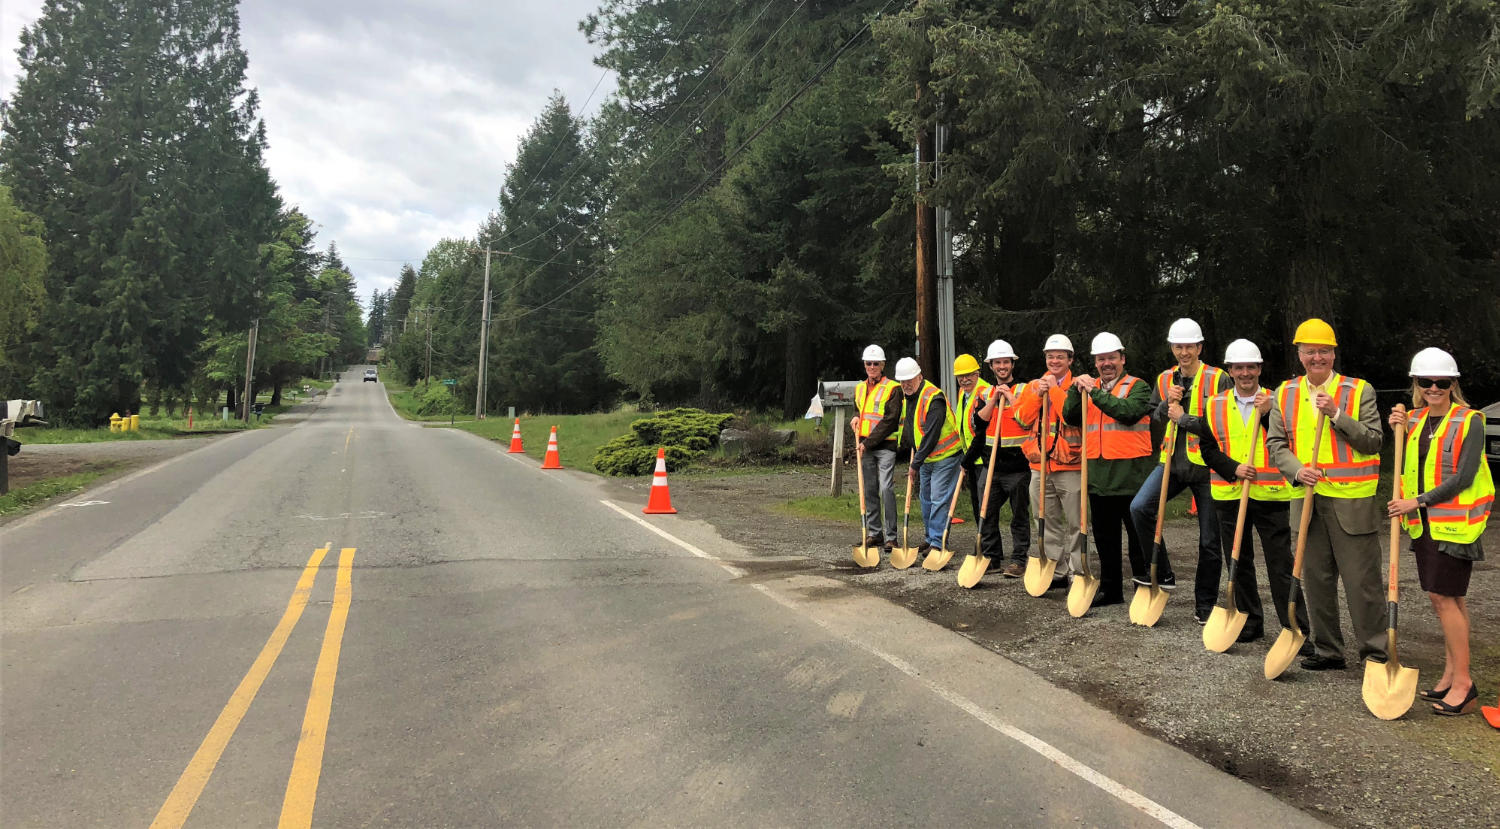 ten officials and project members with golden shovels celebrate groundbreaking on the gravel shoulder of the existing road